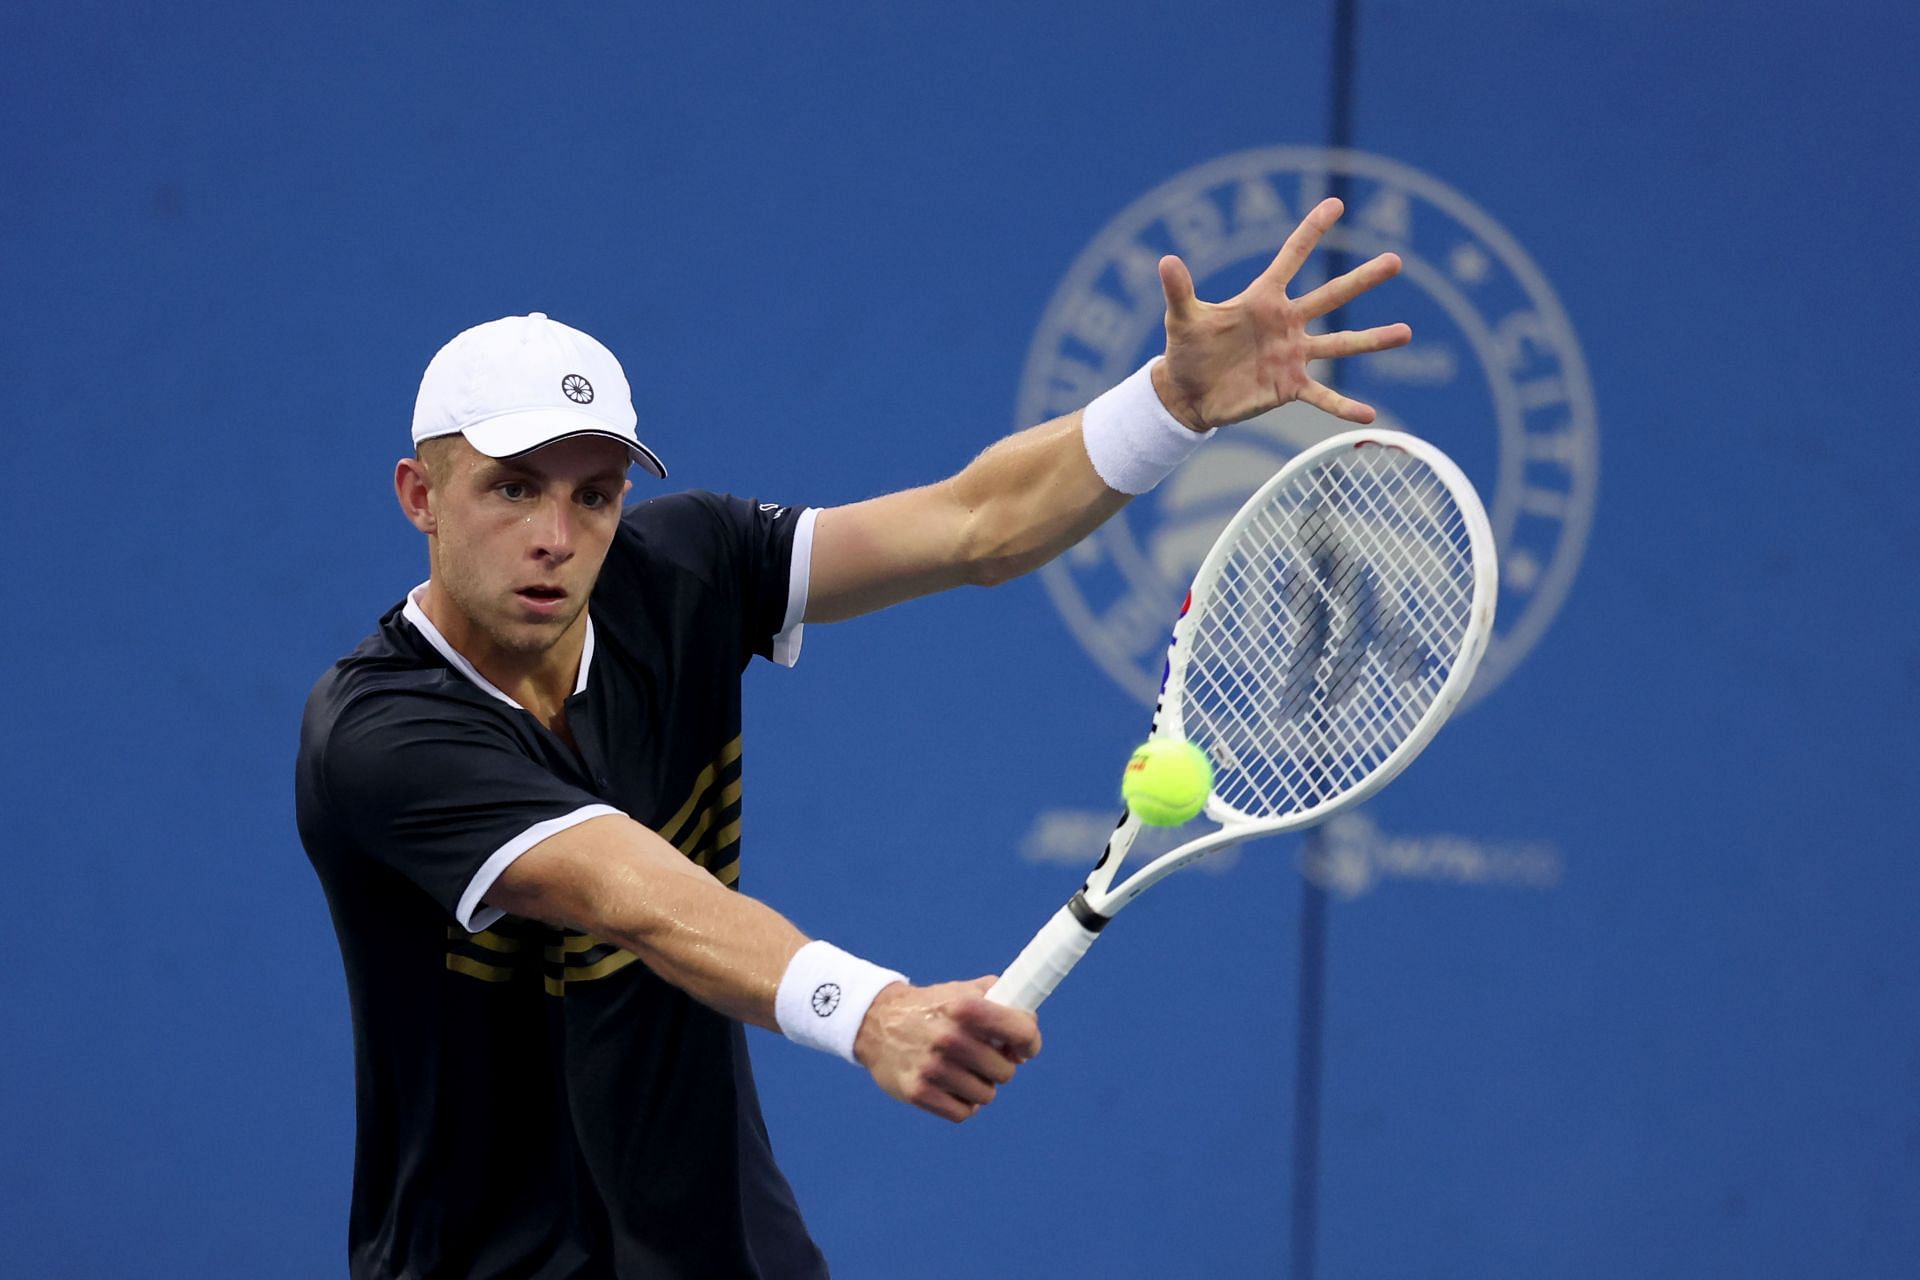 Citi Open 2023: 2 things that stood out in Tallon Griekspoor's semifinal win over Taylor Fritz